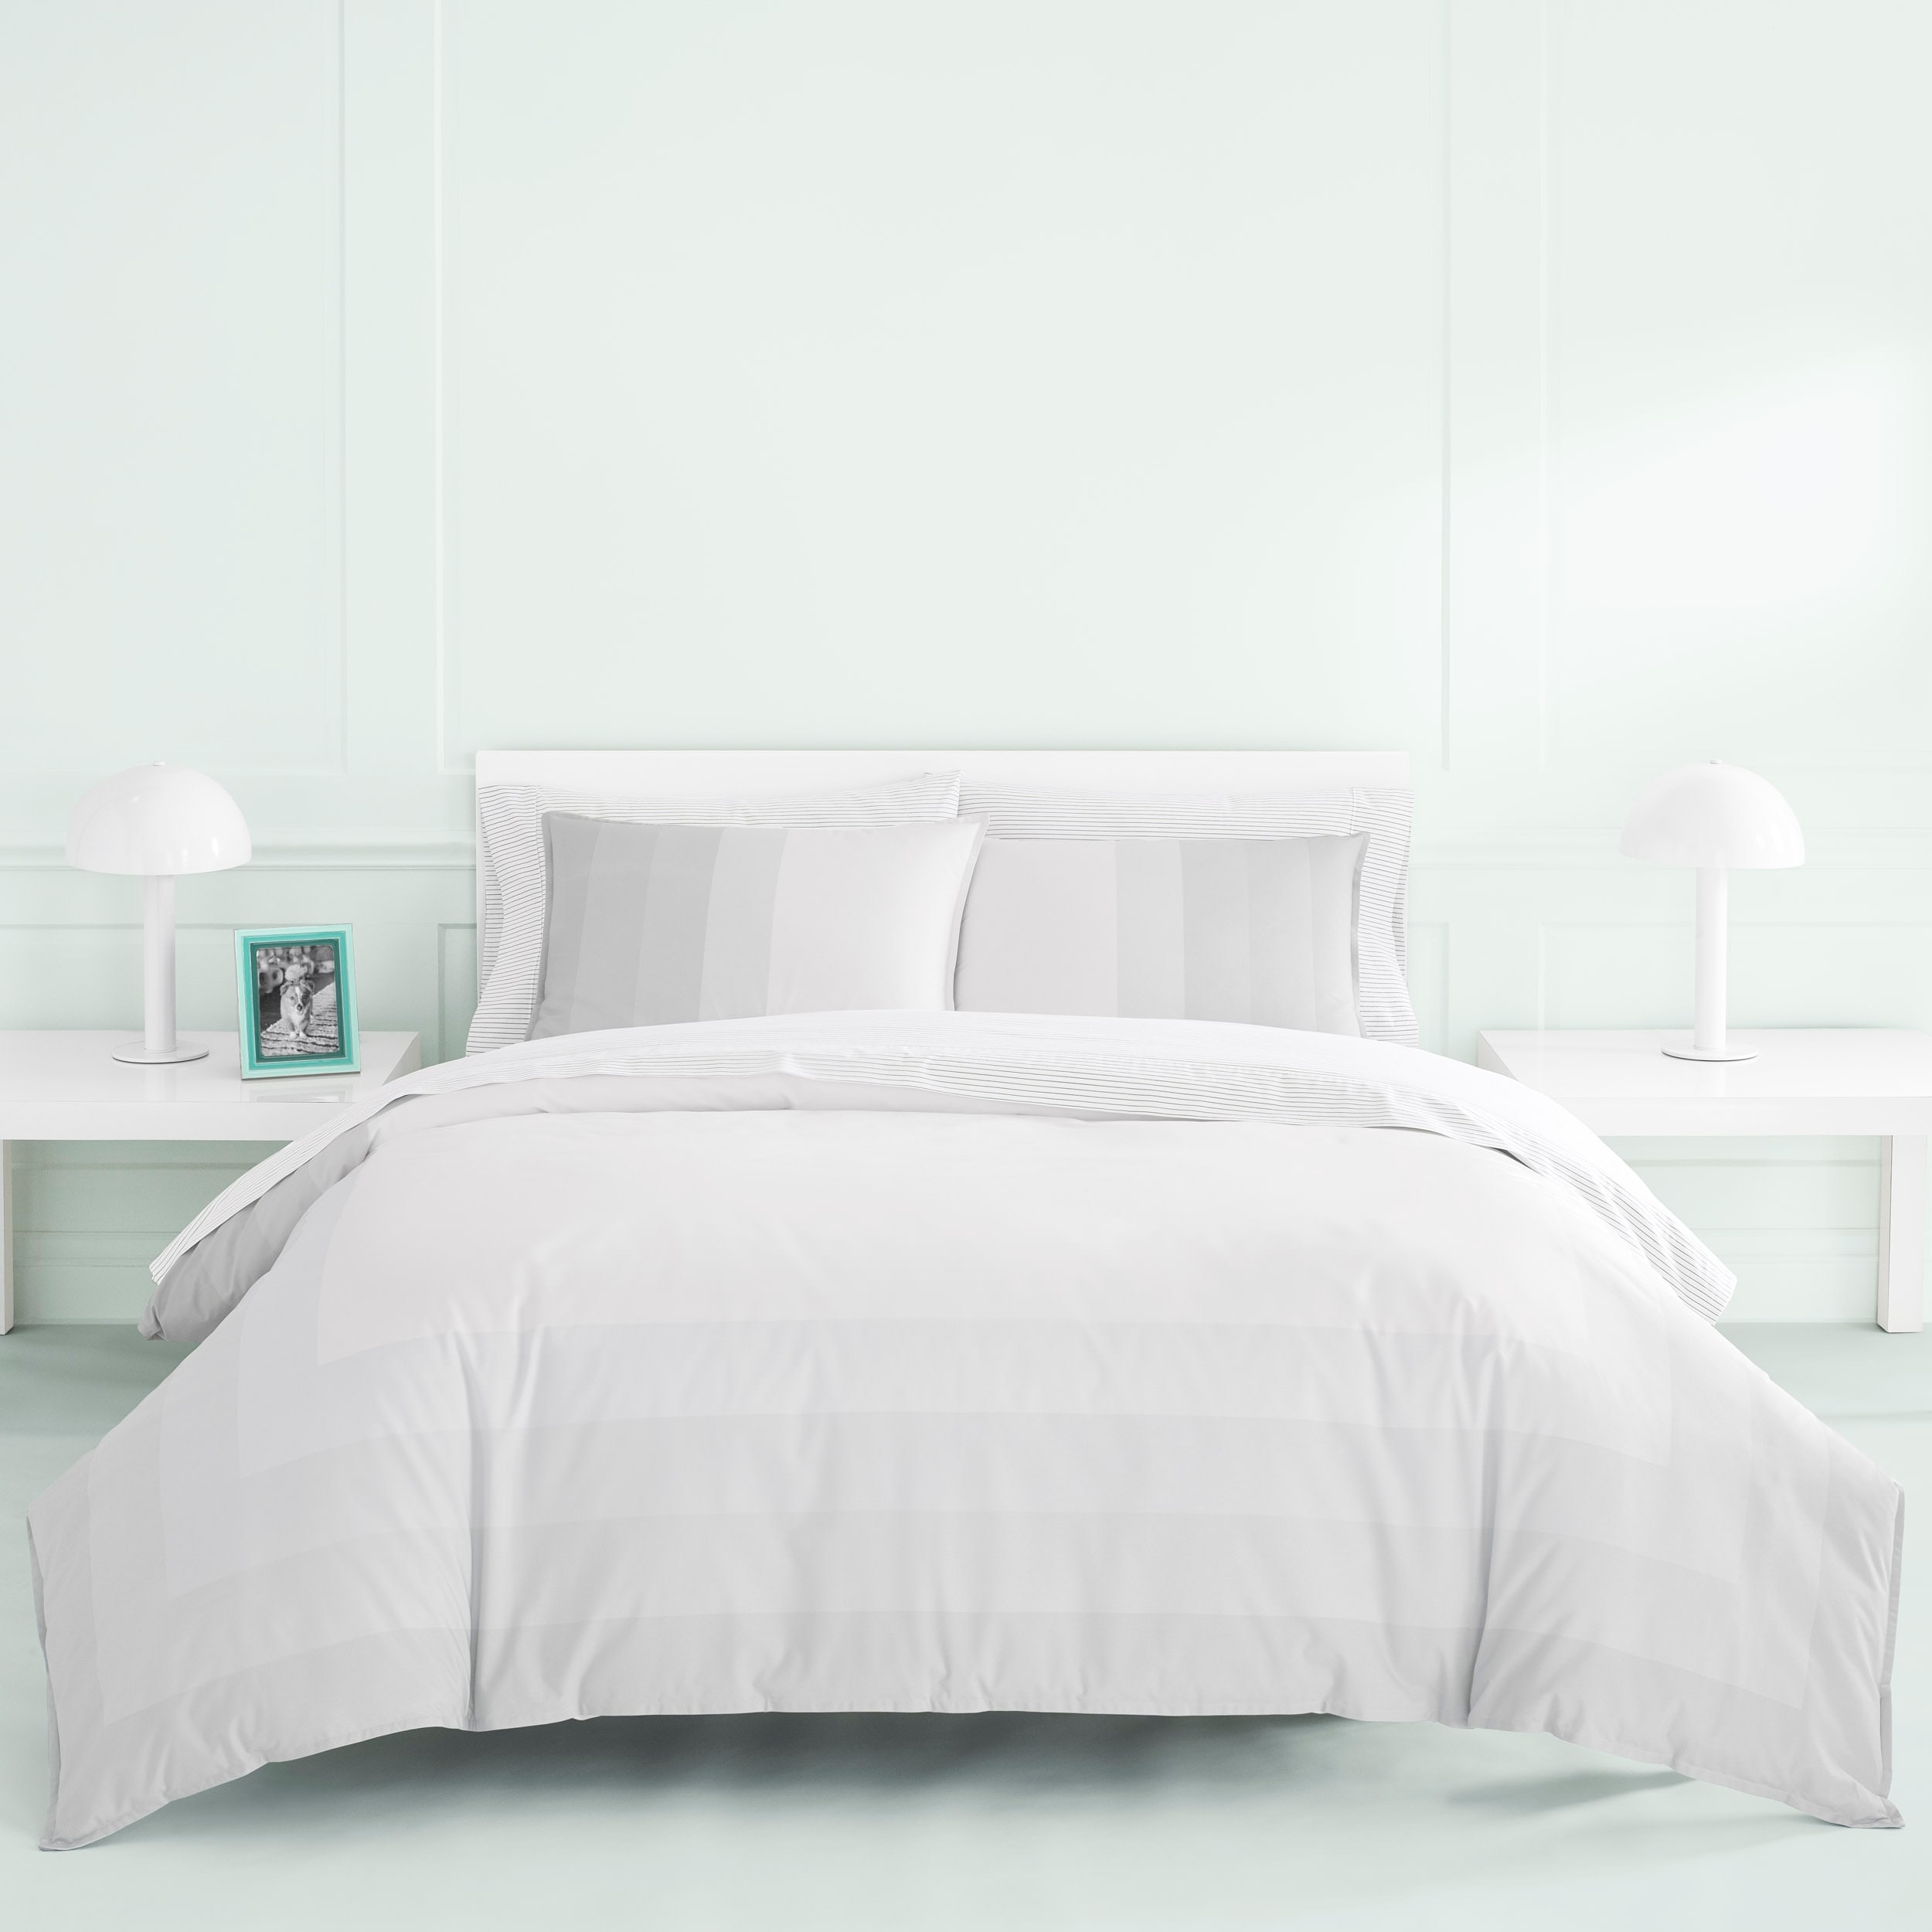 Shop Now House By Jonathan Adler Vally Grey Cotton Duvet Cover Set